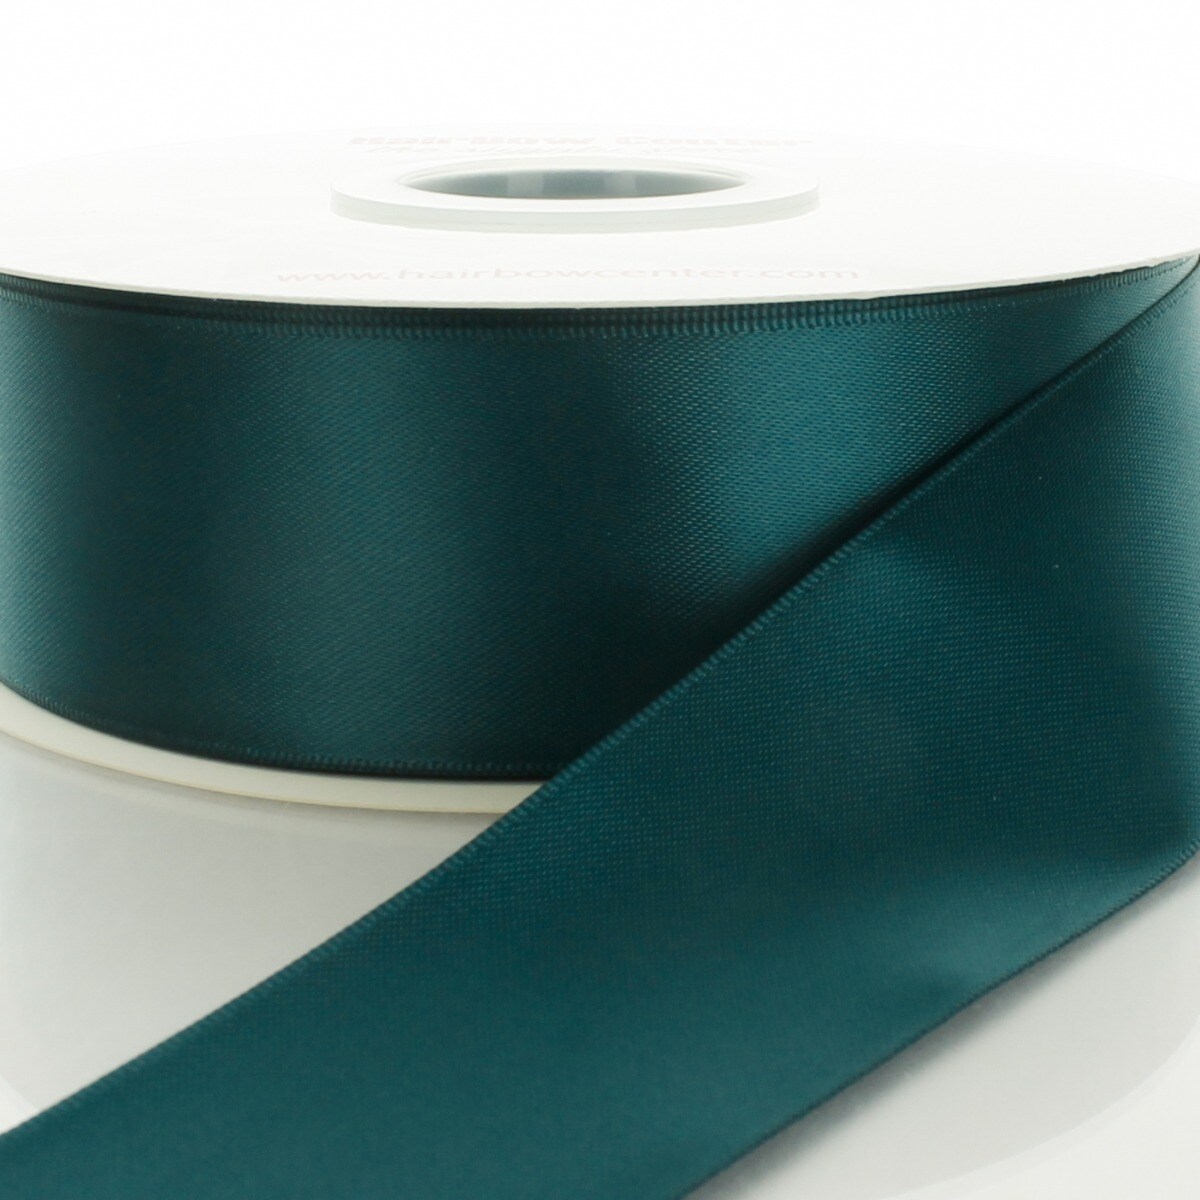 Moss Green 1 1/2 Inch x 100 Yards Double Face Satin Ribbon, JAM Paper